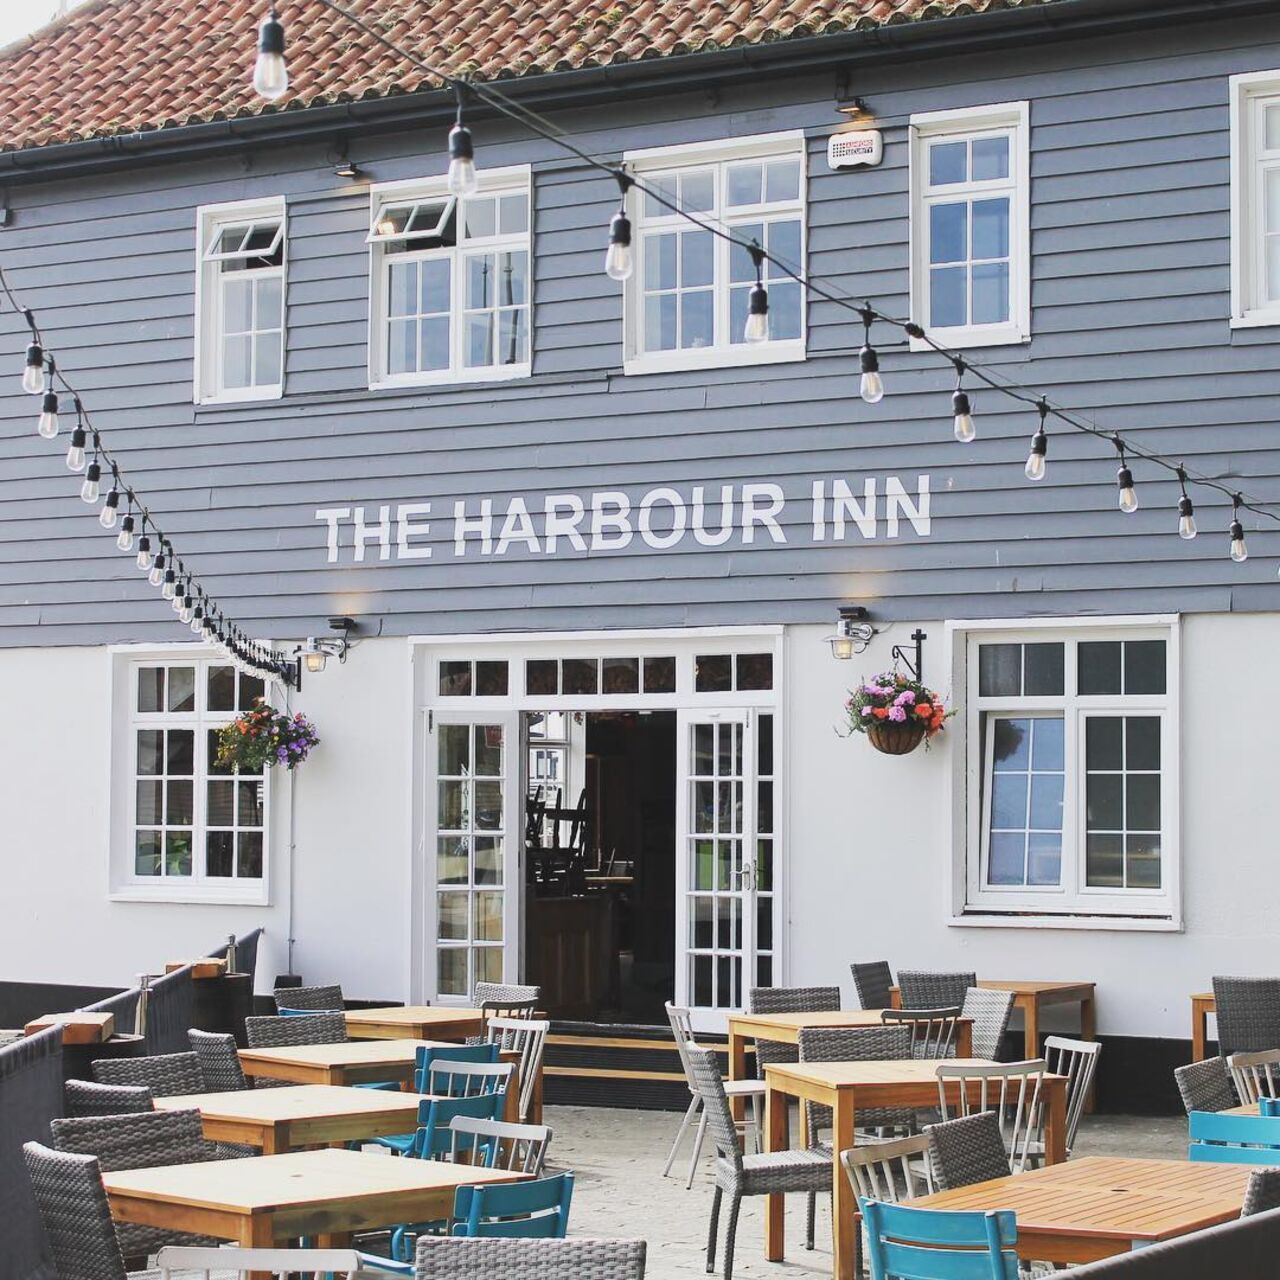 A photo of The Harbour Inn